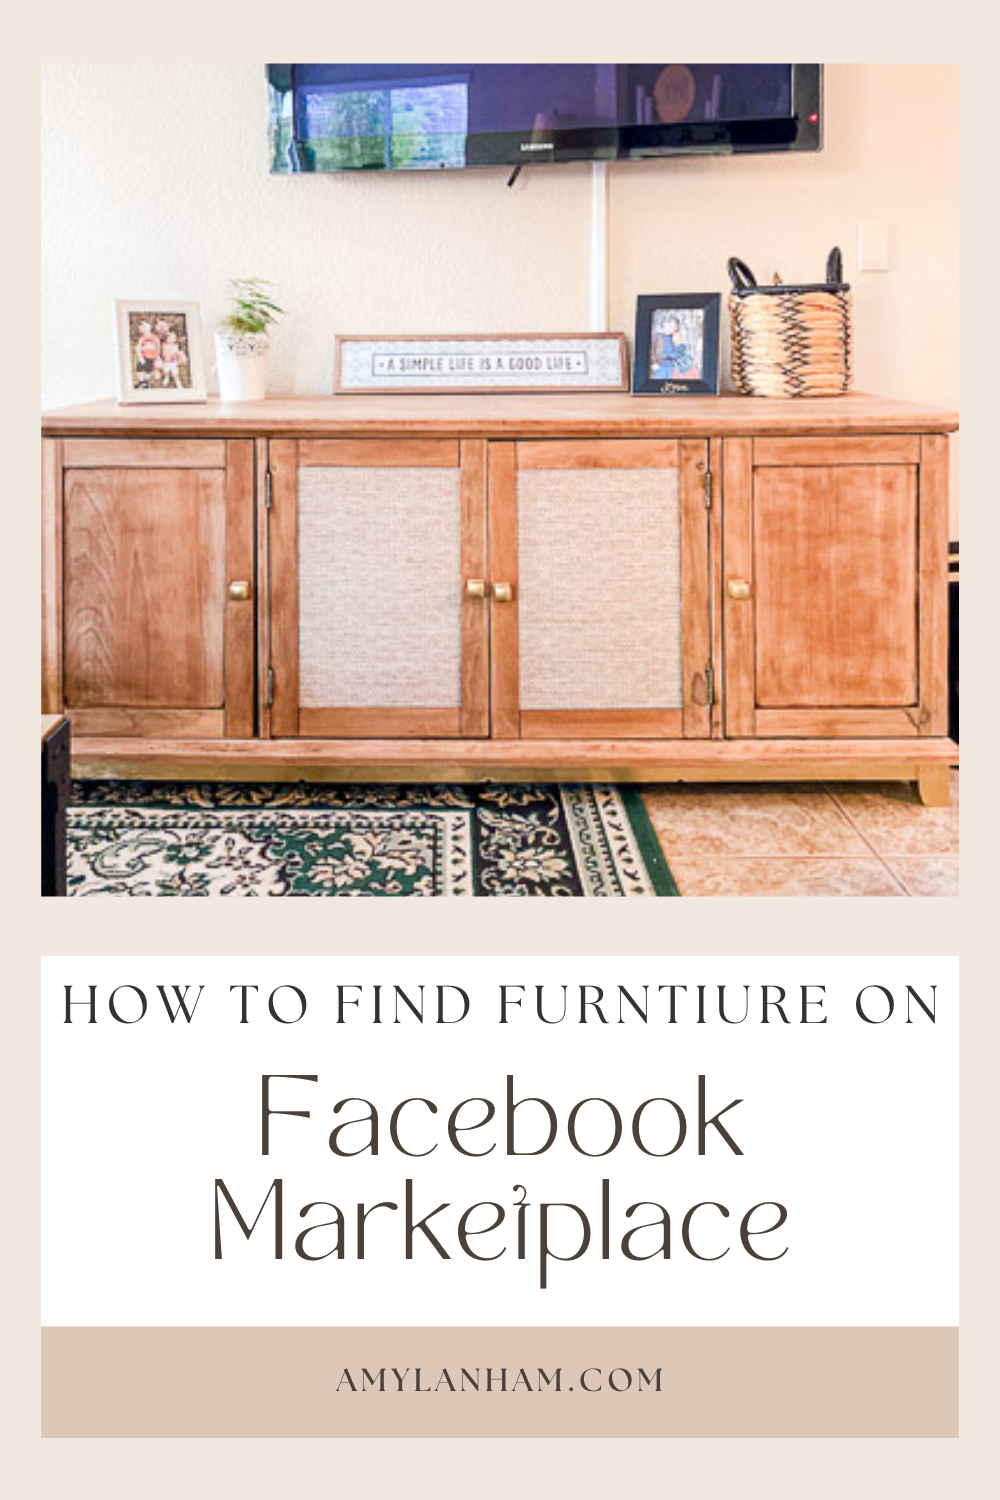 How to find furniture on facebook marketplace